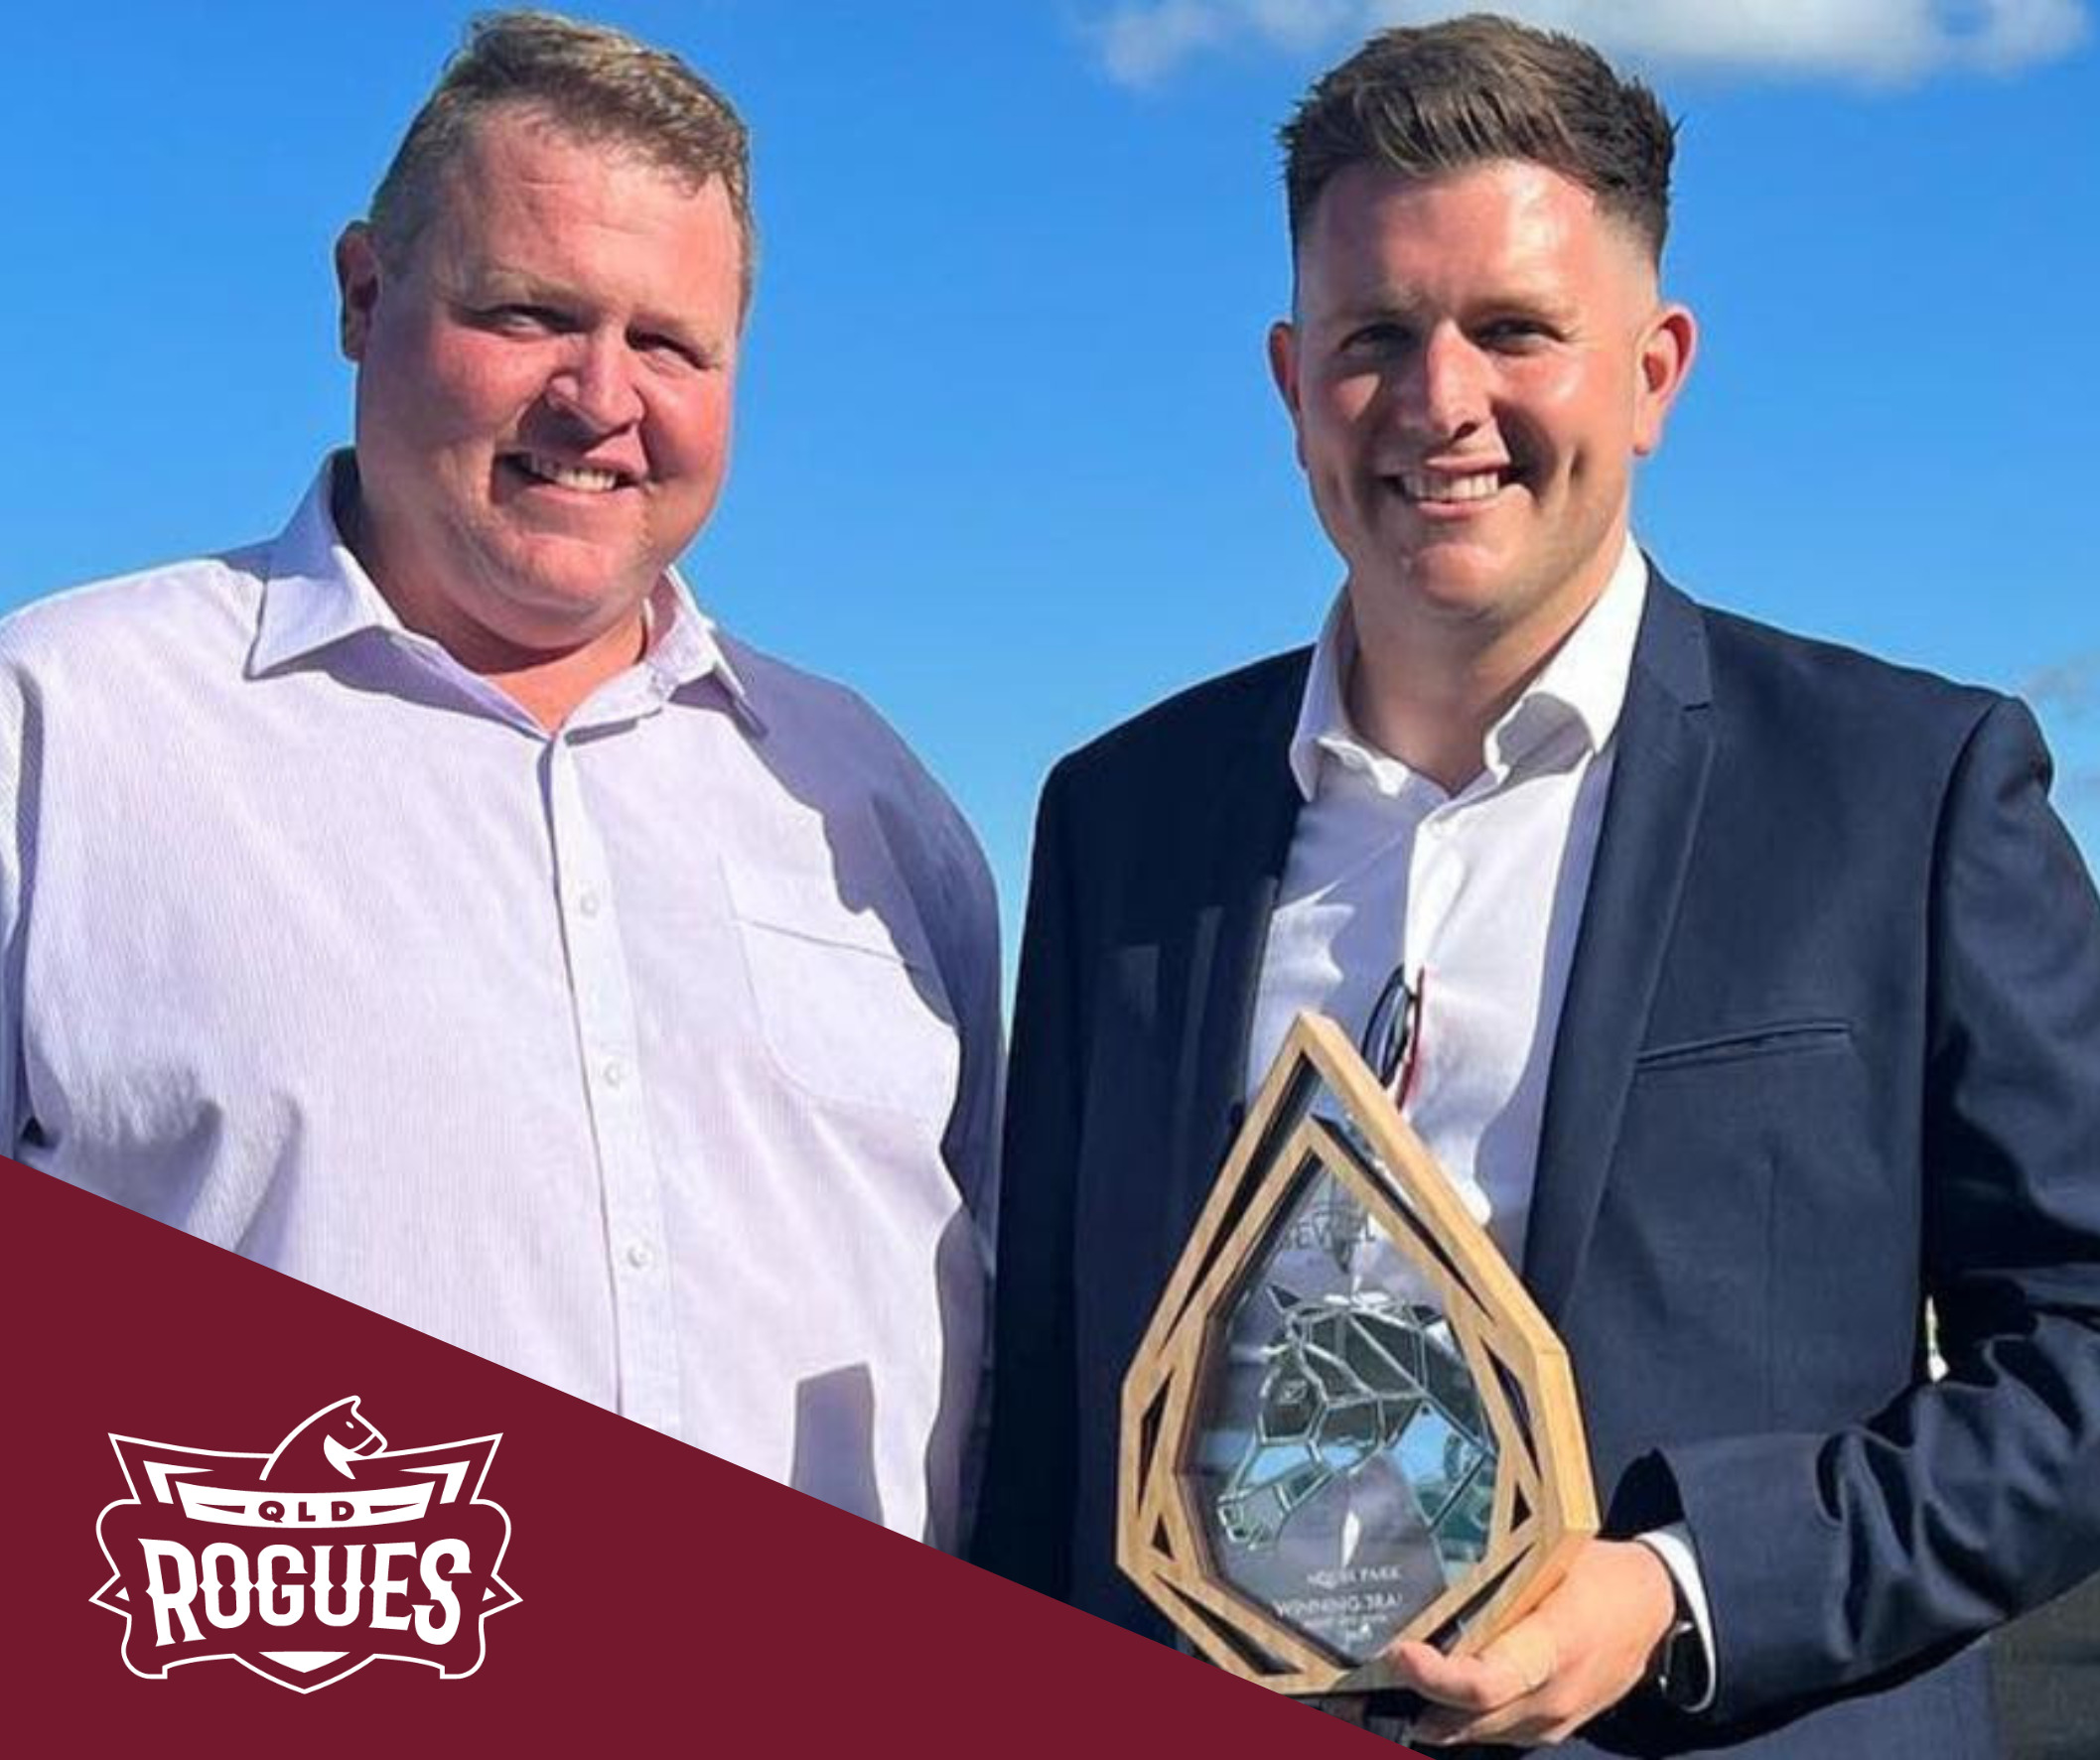 Steve O'Dea & Matt Hoysted racehorse trainers with the QLD Rogues